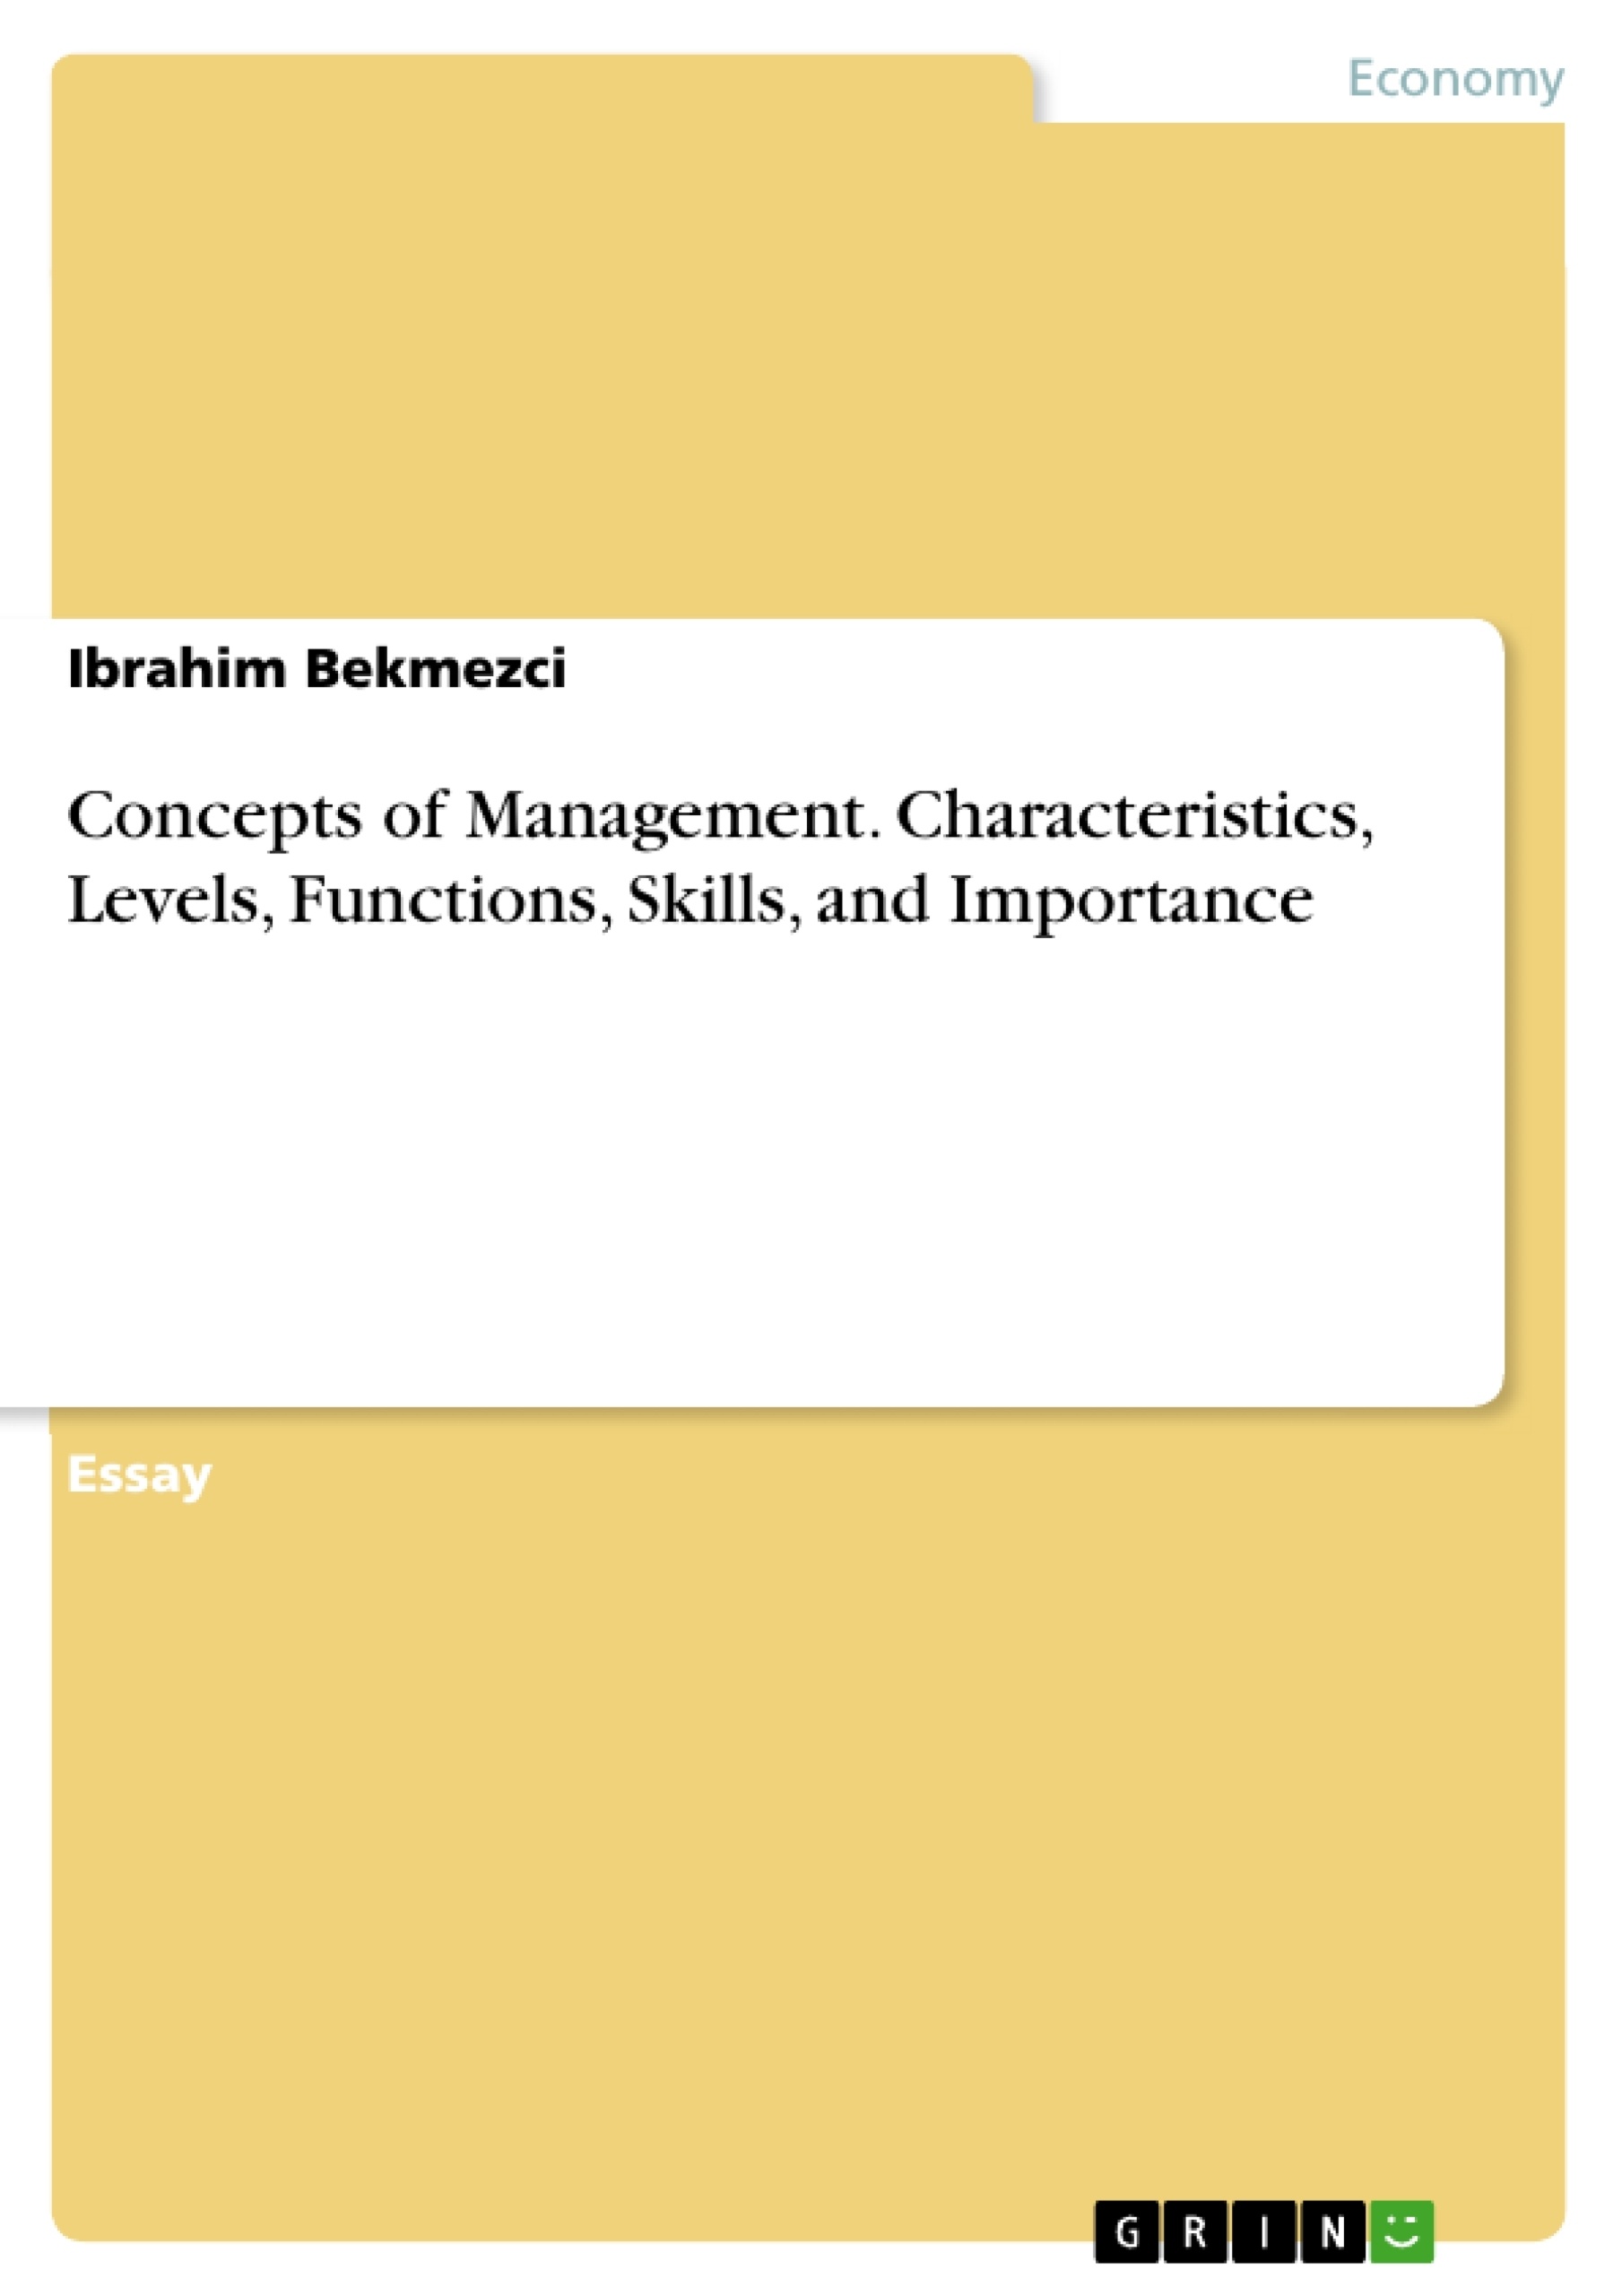 Title: Concepts of Management. Characteristics, Levels, Functions, Skills, and Importance